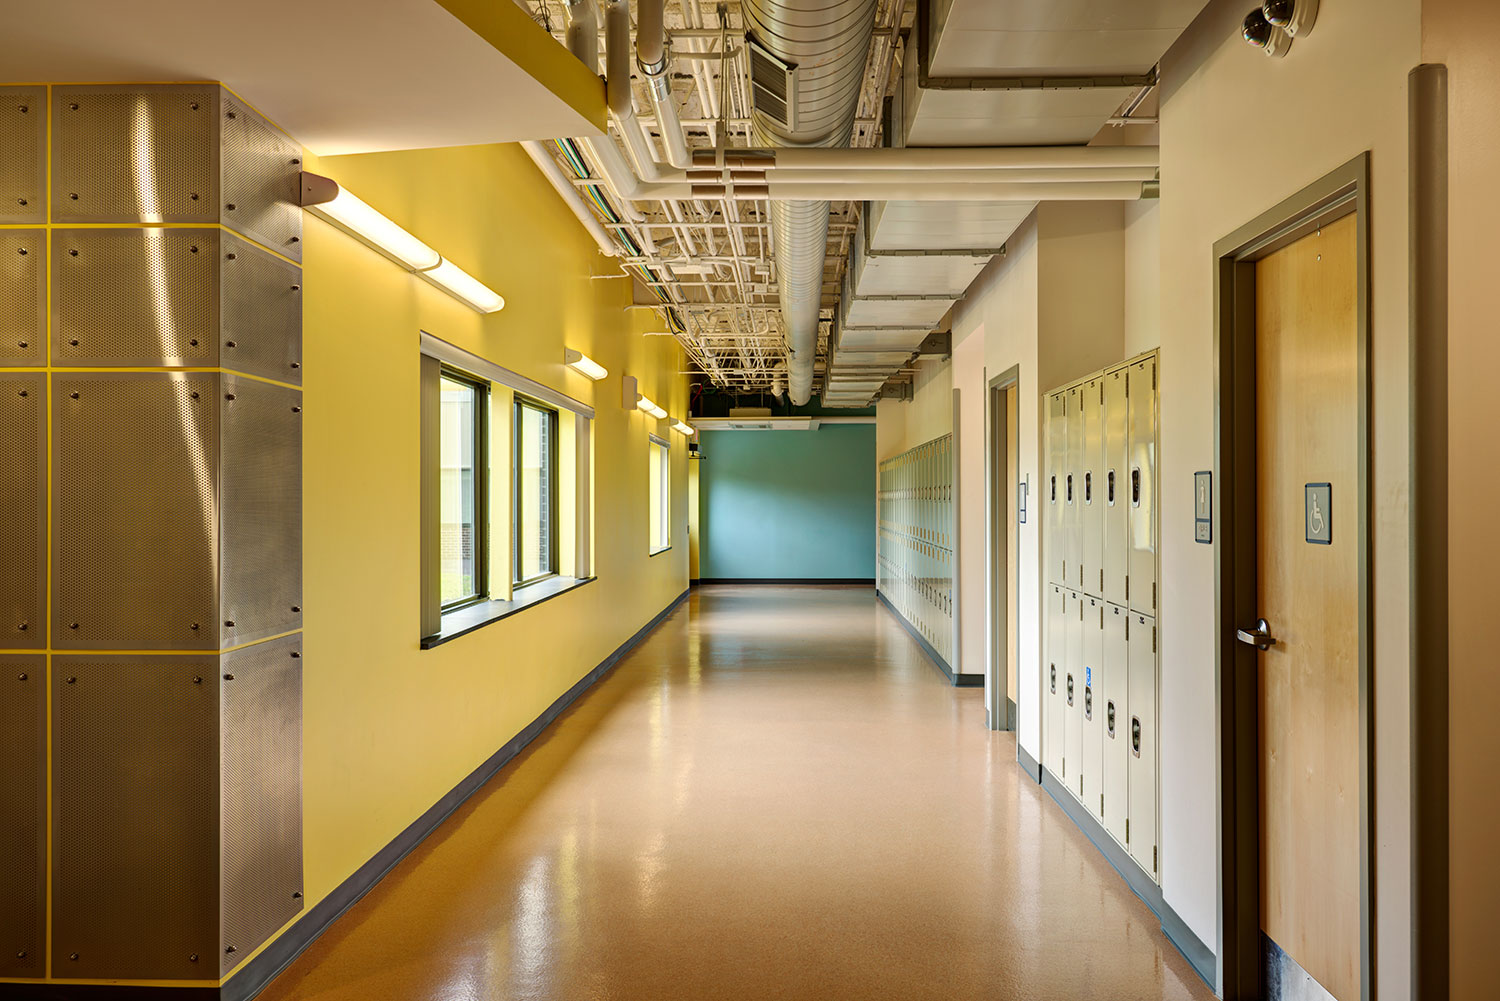 10,000 square feet accommodates common areas and provides corridors to connect the building wings throughout the campus to improve student circulation and safety.